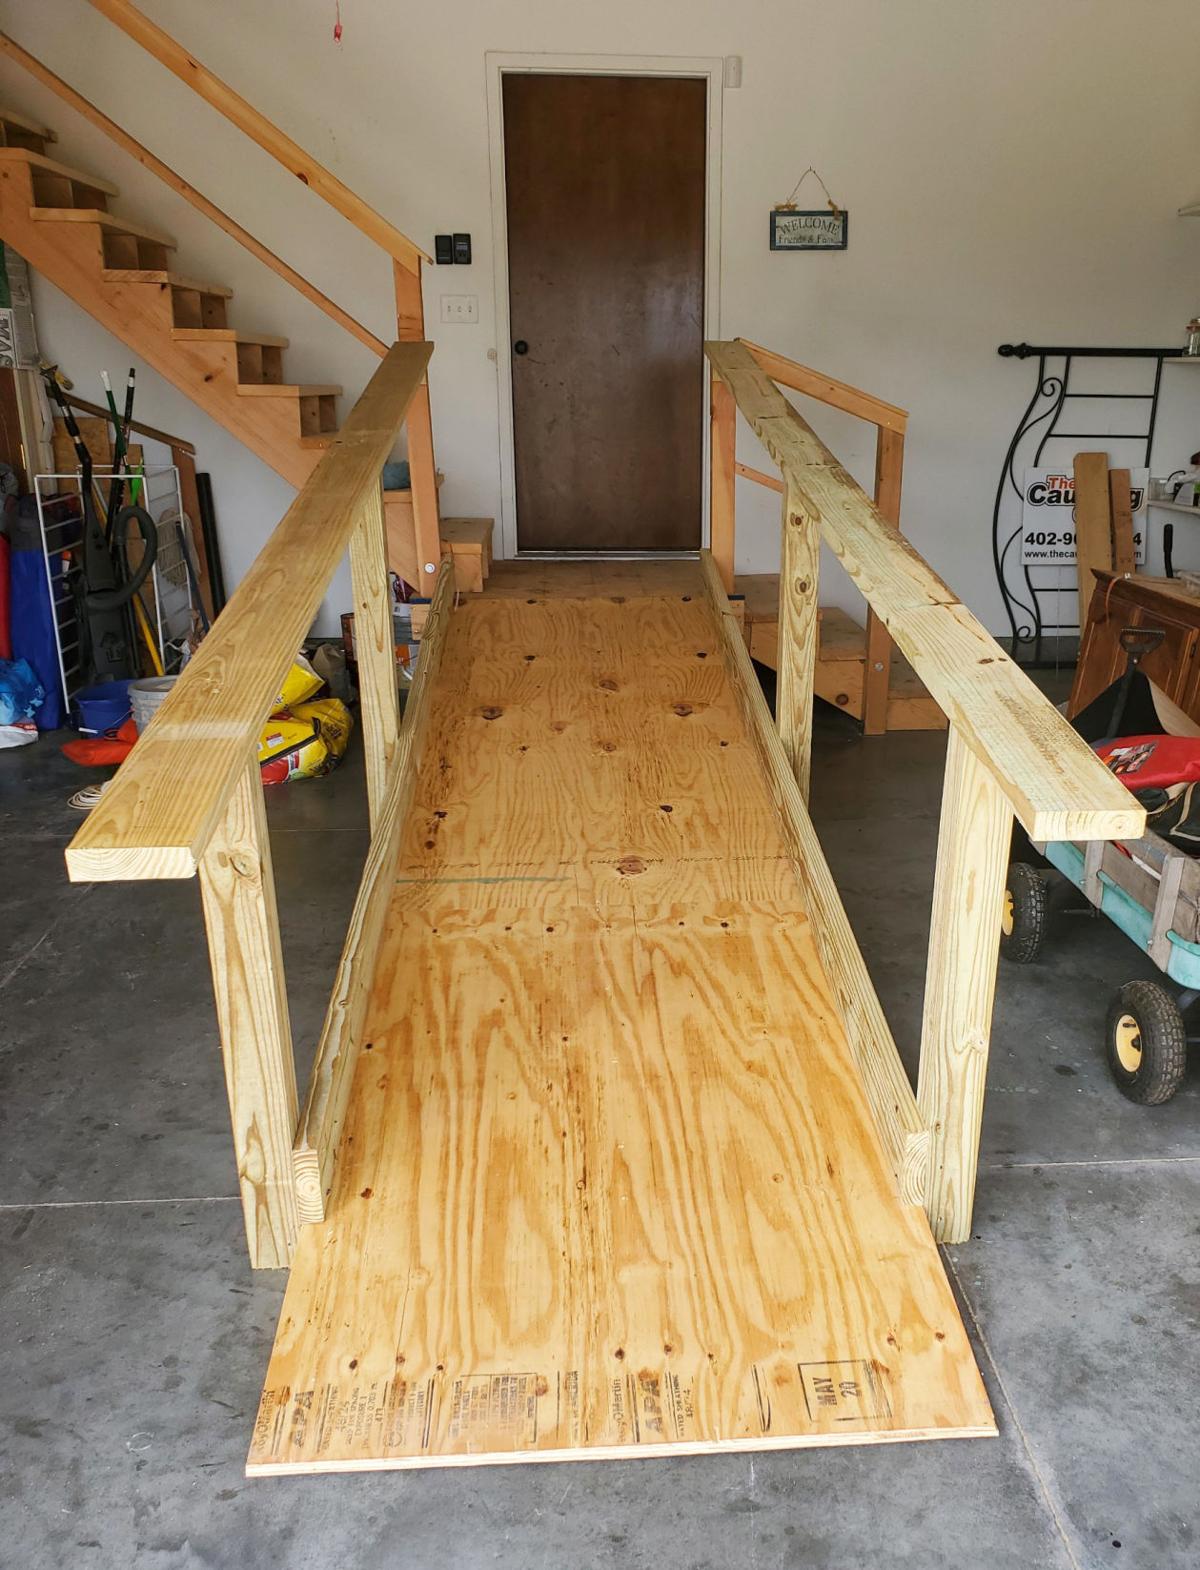 Fremont Area Veterans Coalition Builds, How To Build A Wheelchair Ramp With Plywood